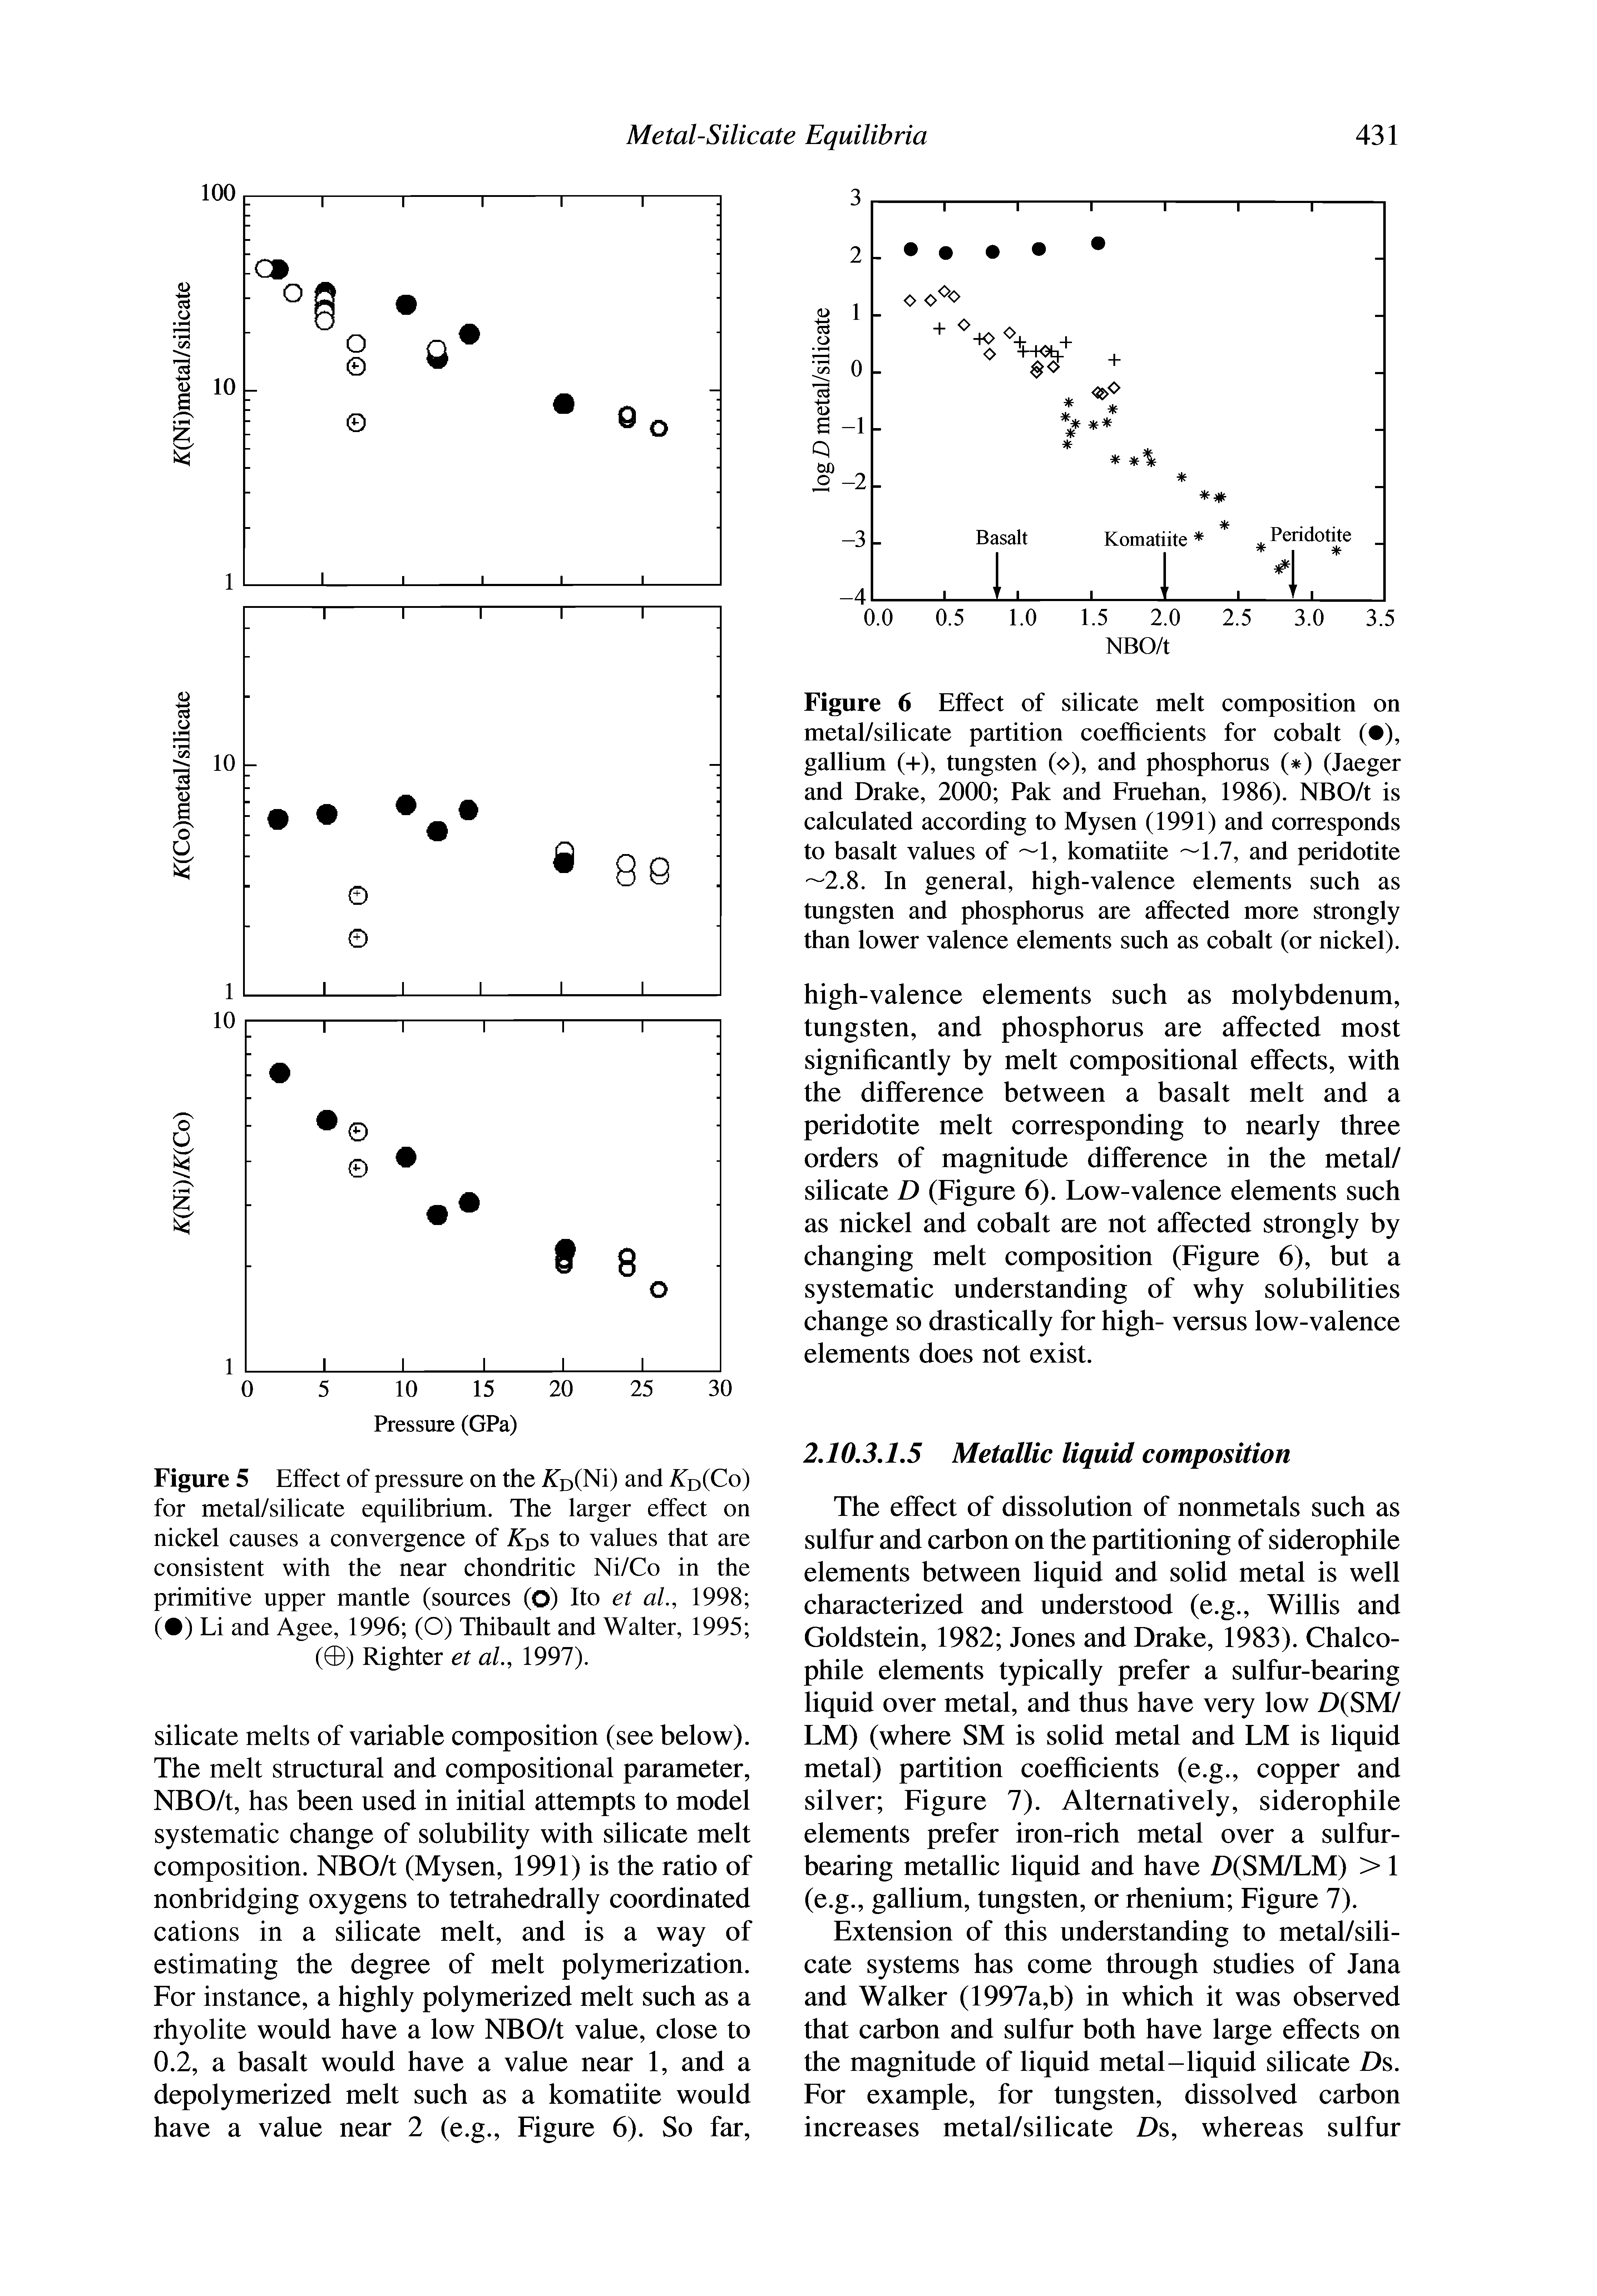 Figure 5 Effect of pressure on the oCNi) and d(Co) for metal/silicate equilibrium. The larger effect on nickel causes a convergence of dS to values that are consistent with the near chondritic Ni/Co in the primitive upper mantle (sources (O) Ito et al, 1998 ( ) Li and Agee, 1996 (O) Thibault and Walter, 1995 ...